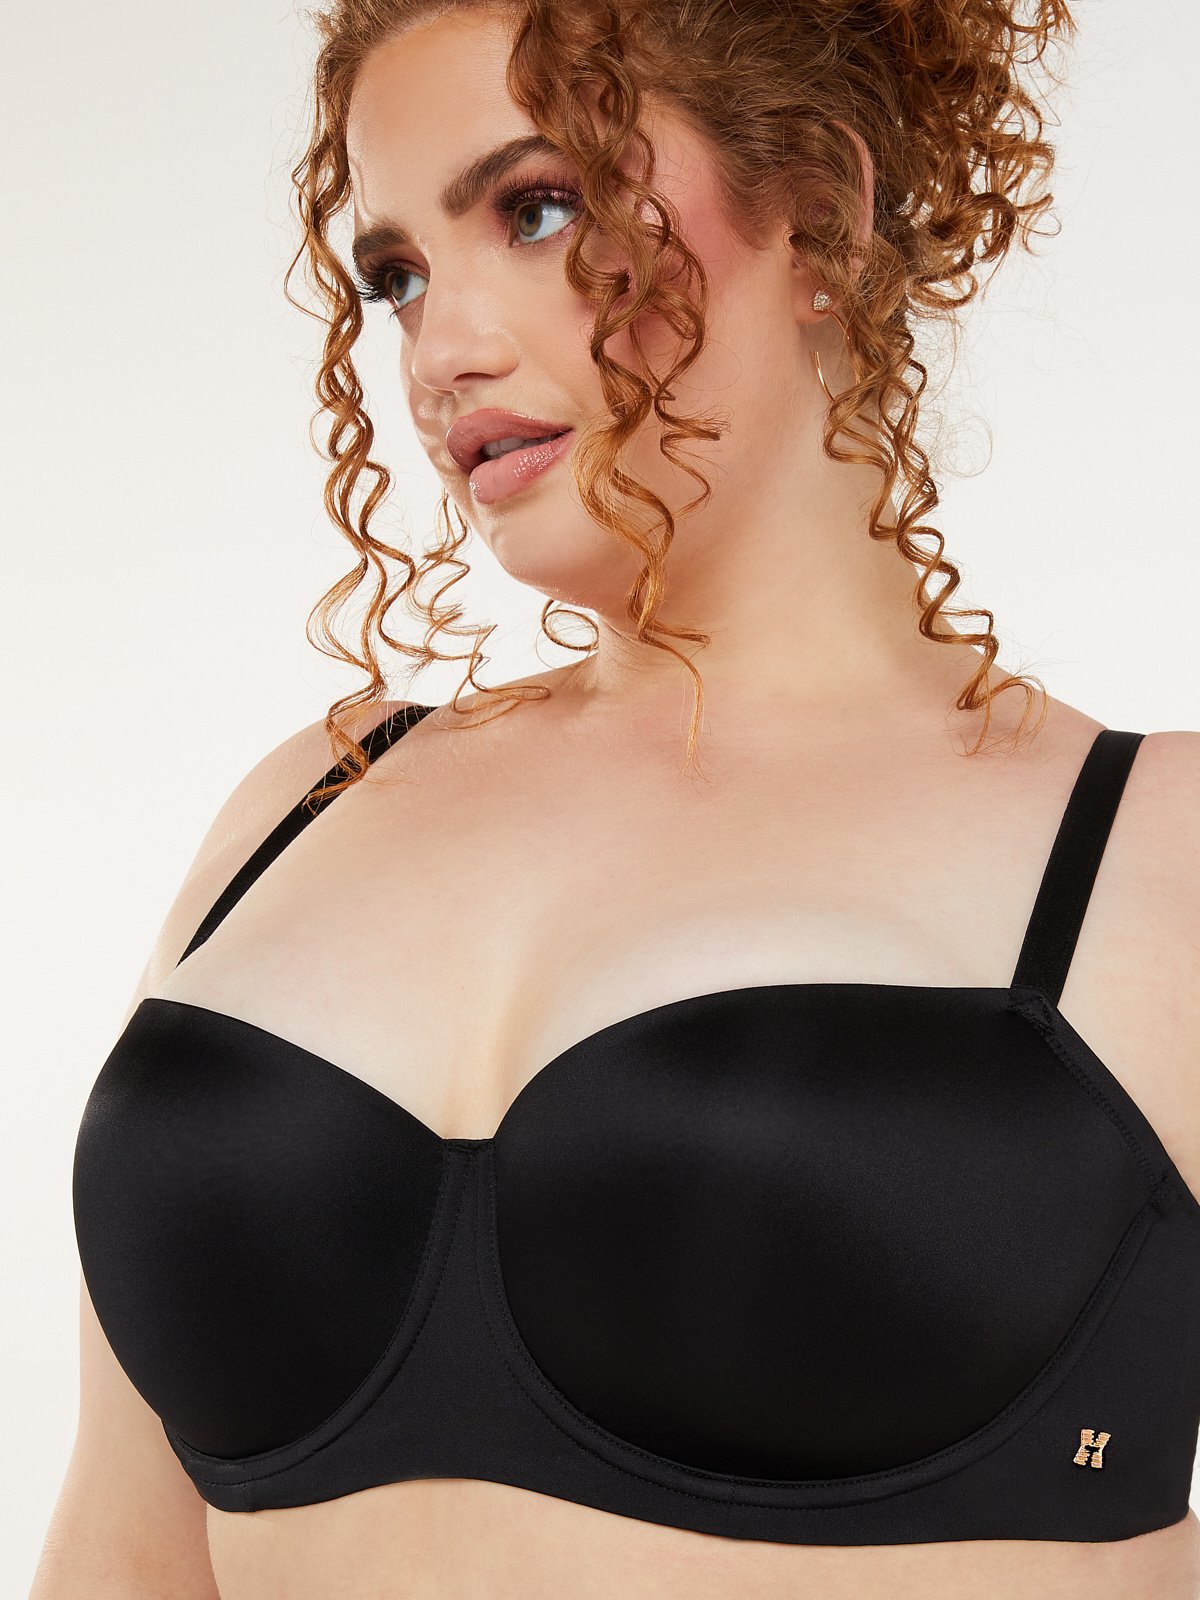 Trylo Intimates on X: No more bulky bra lines! RIZA BAE's sleek design  disappears under even the most fitted clothing. Product shown- RIZA BAE  #TryloIndia #TryloIntimates #RizaIntimates #RizabyTrylo #RIZABAEBra  #NoMoreBulkyLines #FashionMeetsFunction